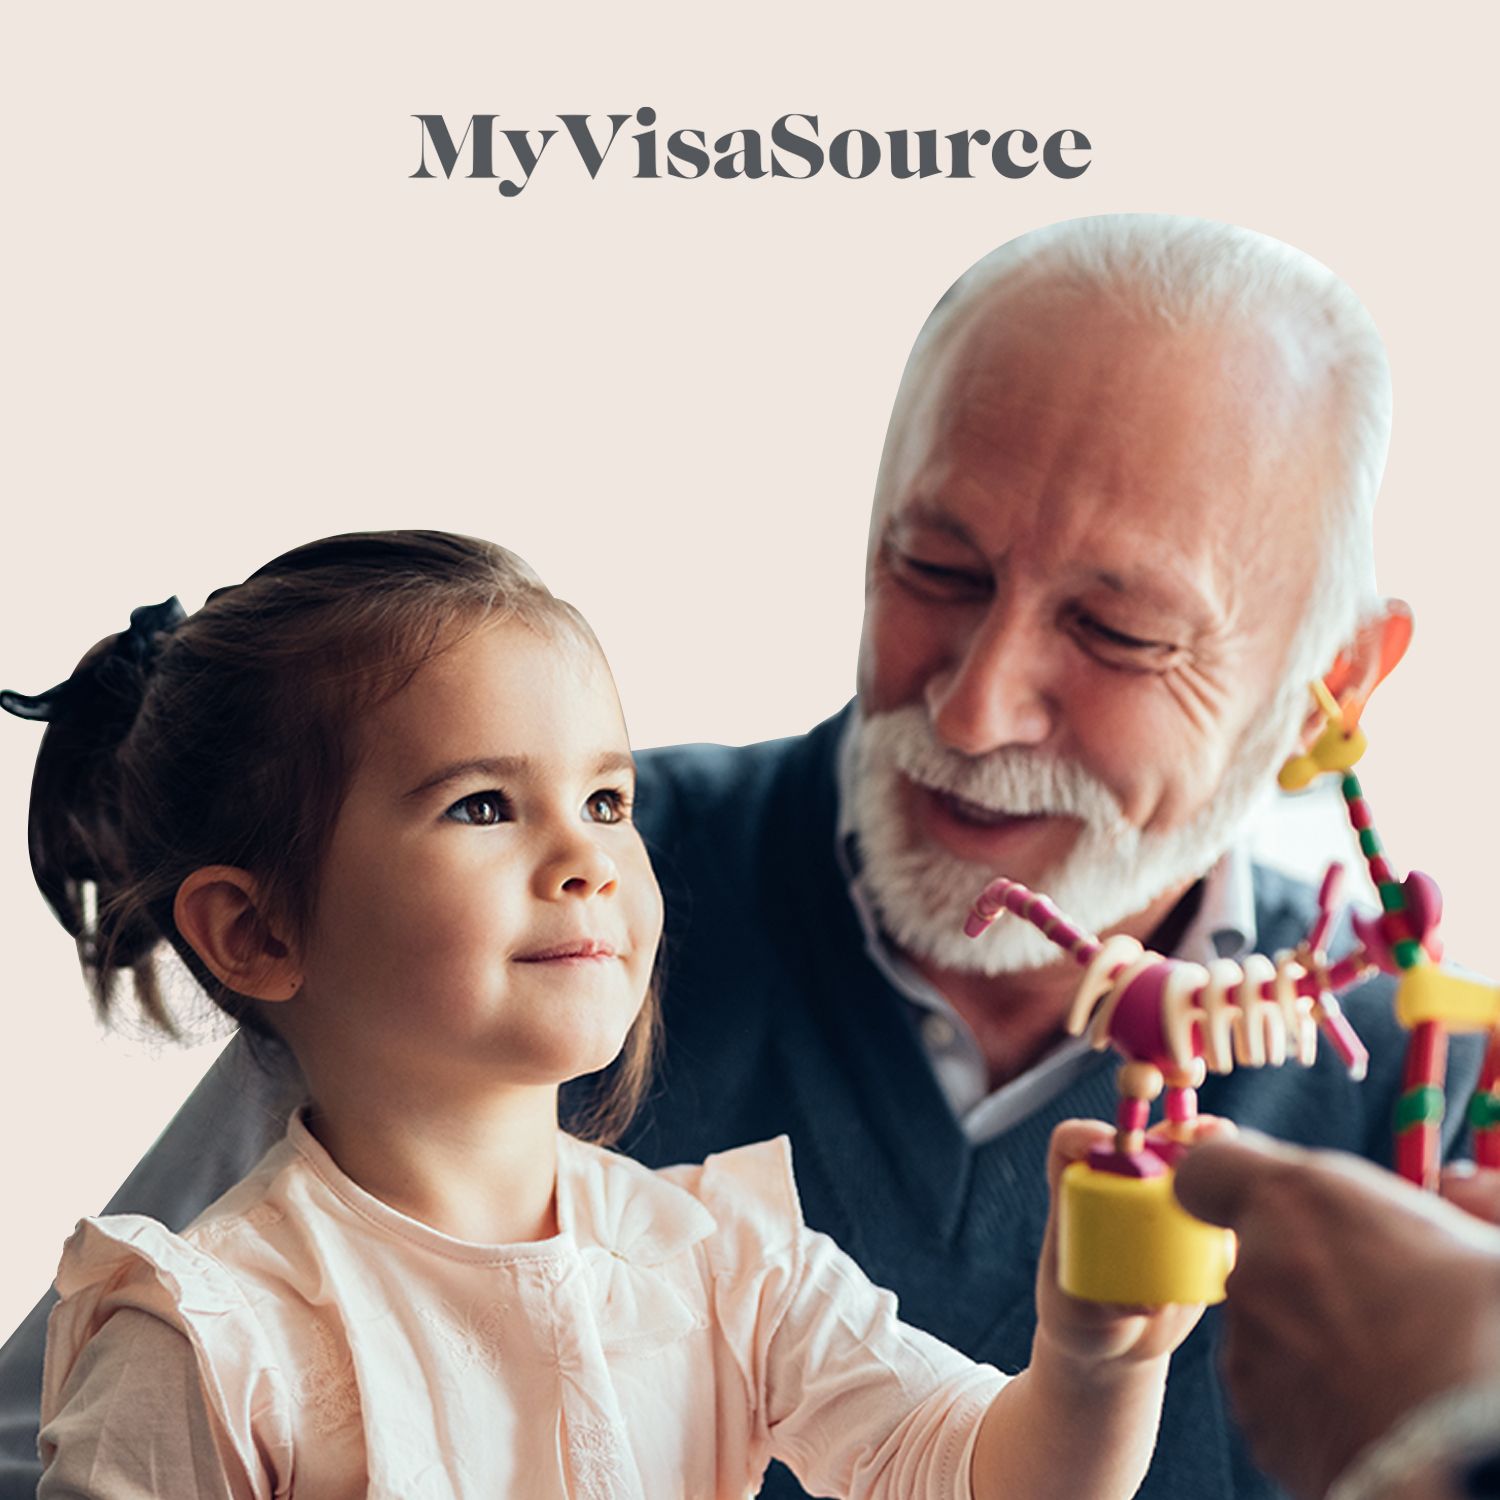 grandfather holding granddaughter playing with a toy my visa source